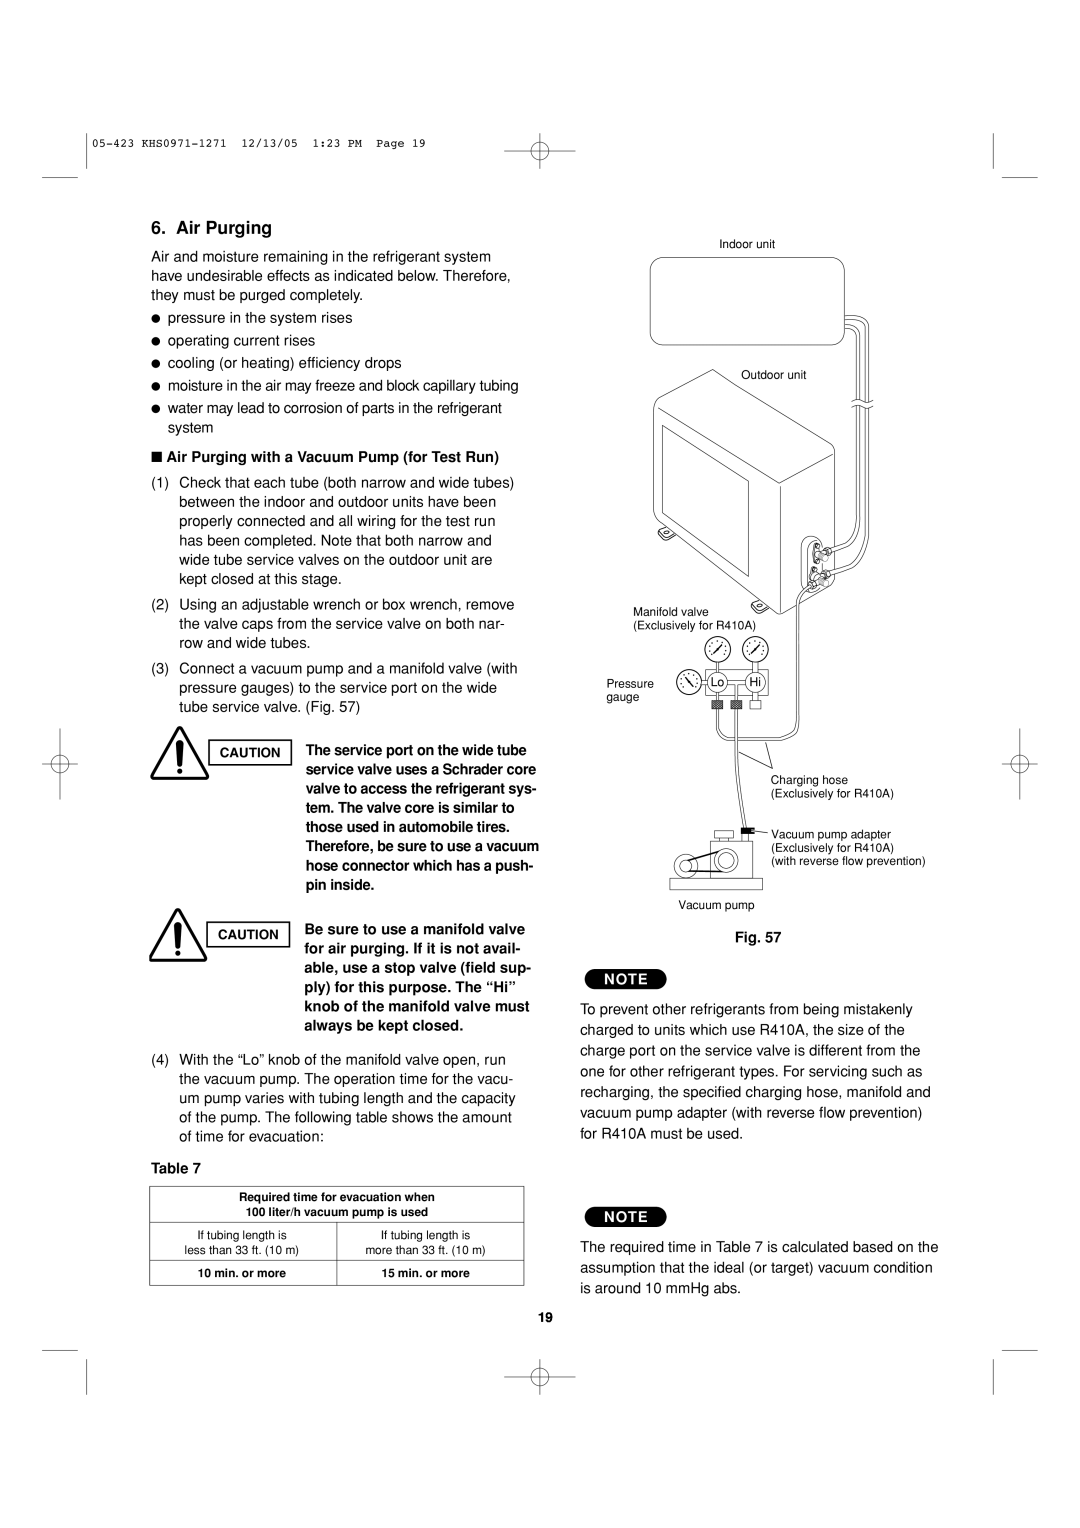 Sanyo 8.53E+13 installation instructions Air Purging 